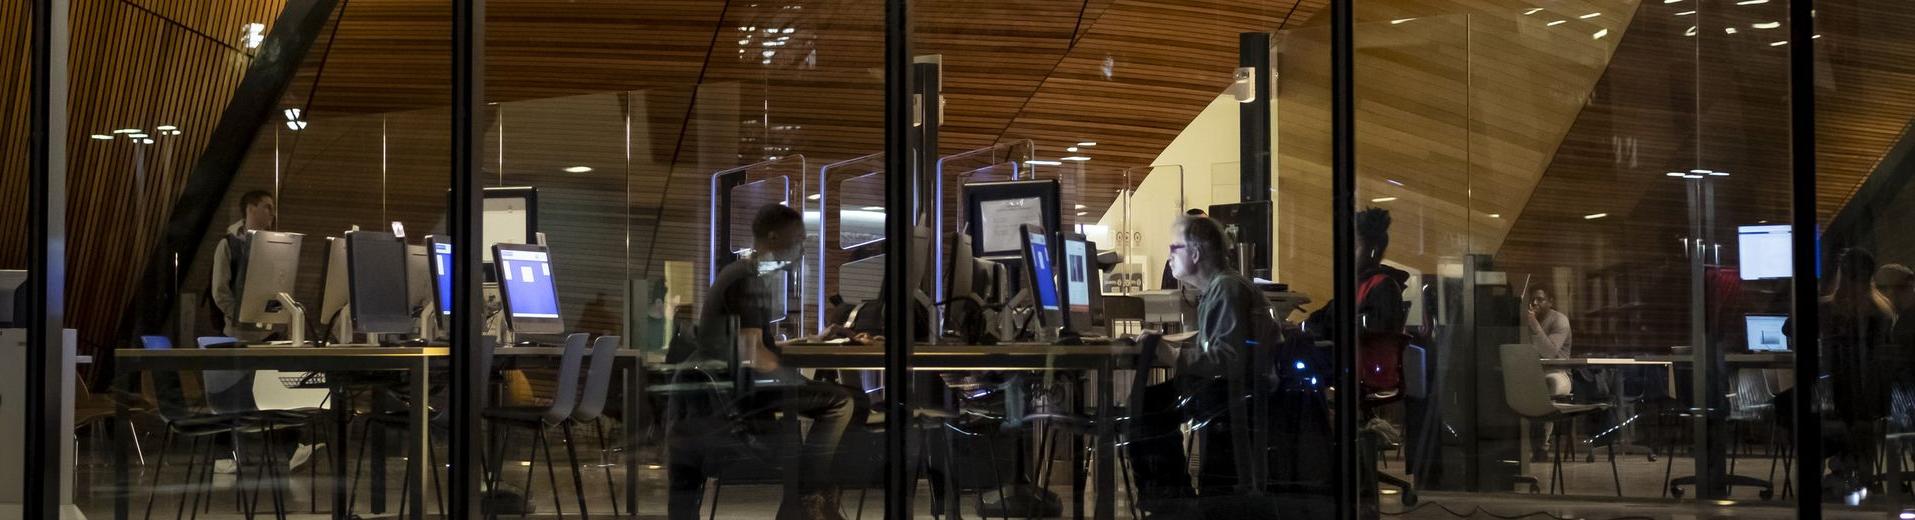 Students are studying at night in Charles Library